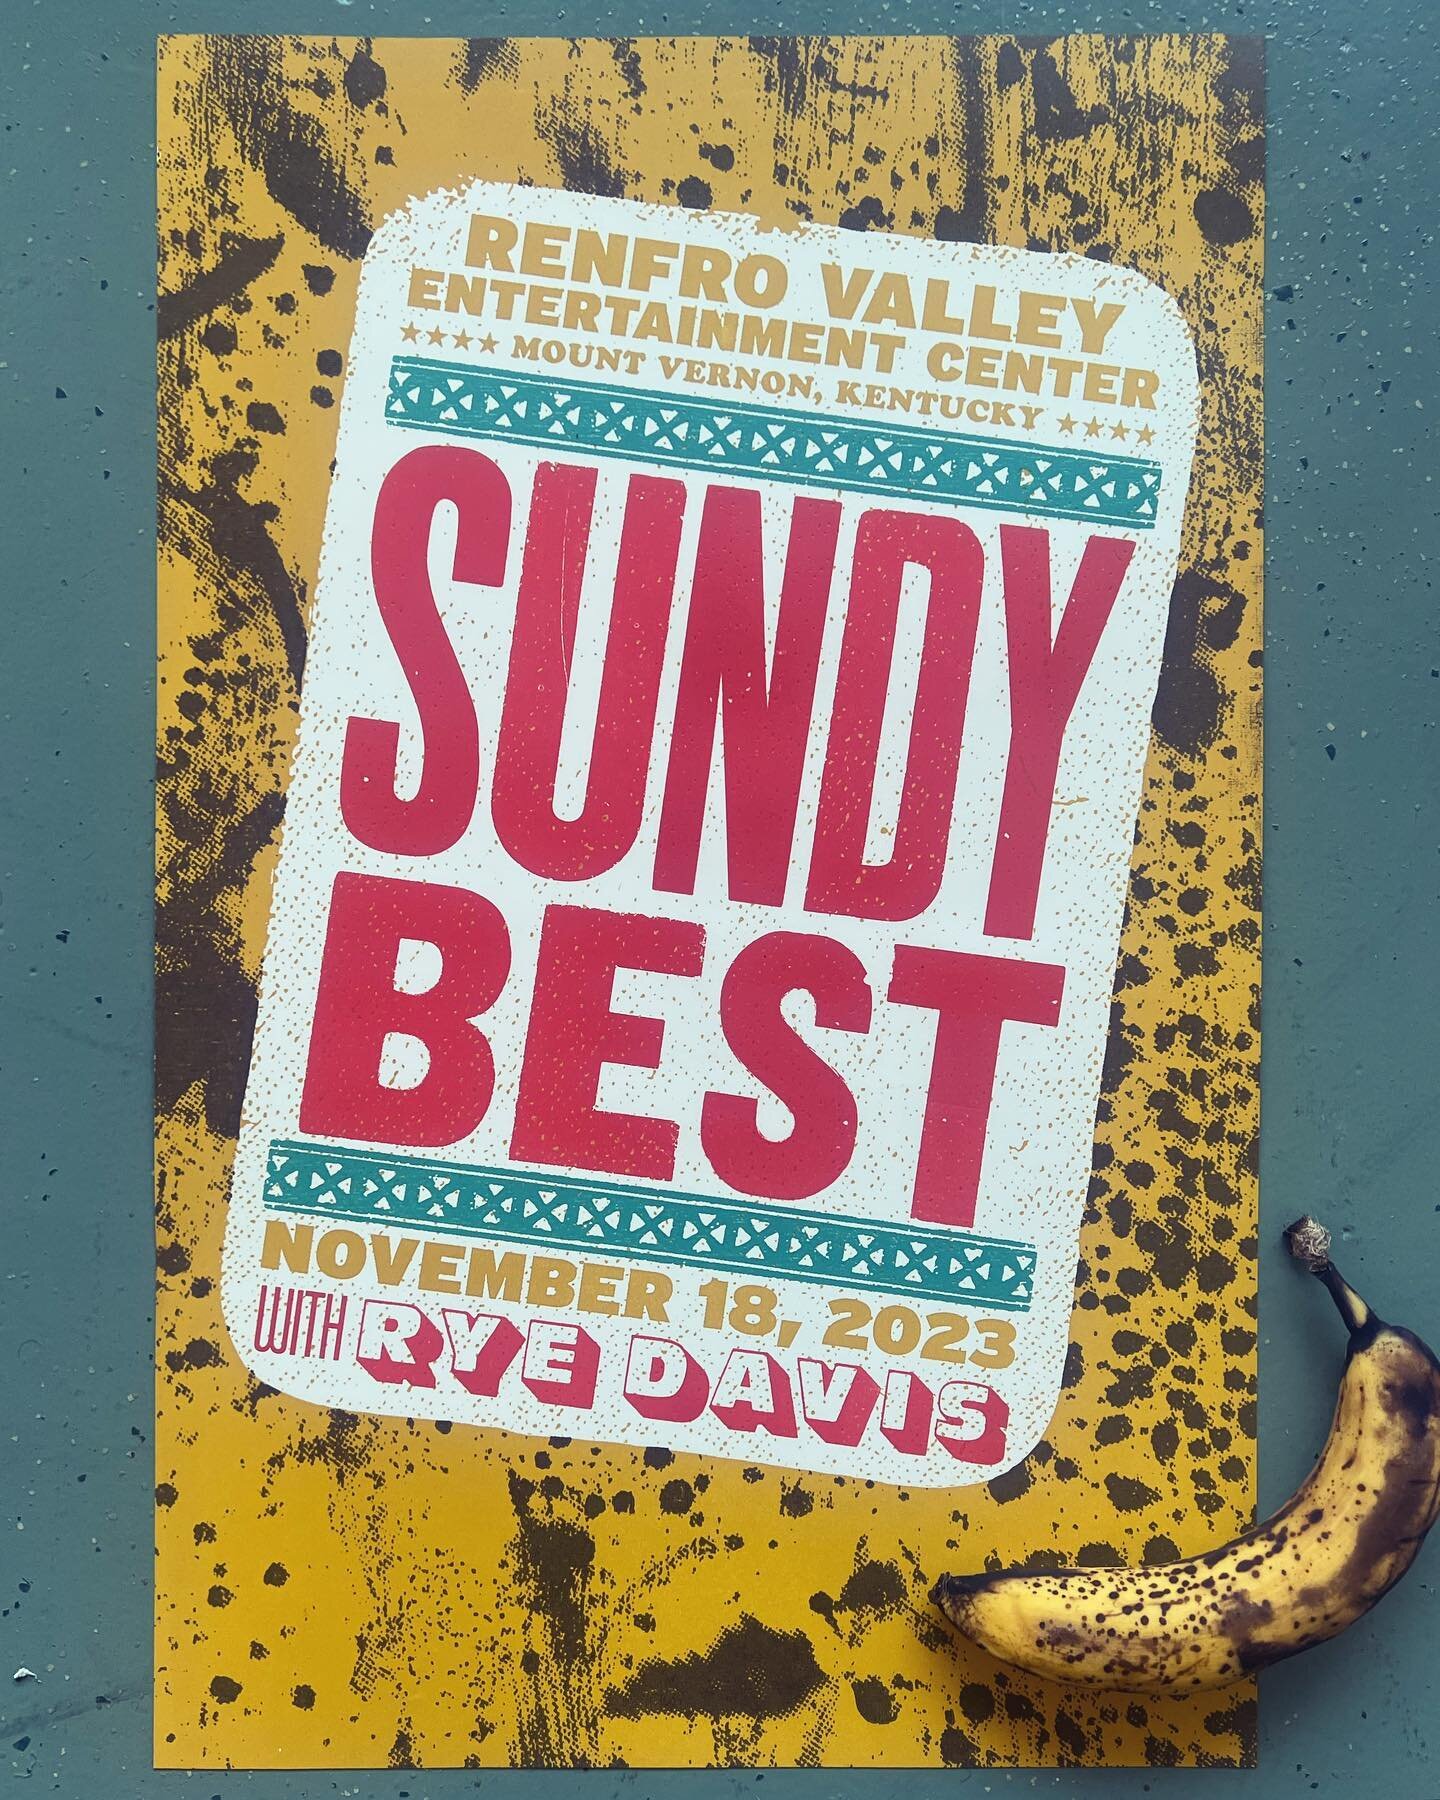 Color matching bananas for my favorite Kentucky duo @sundybest! Heading down to see these dudes rock @renfro_valley this weekend and I couldn&rsquo;t be more pumped. Love how these silly prints turned out!